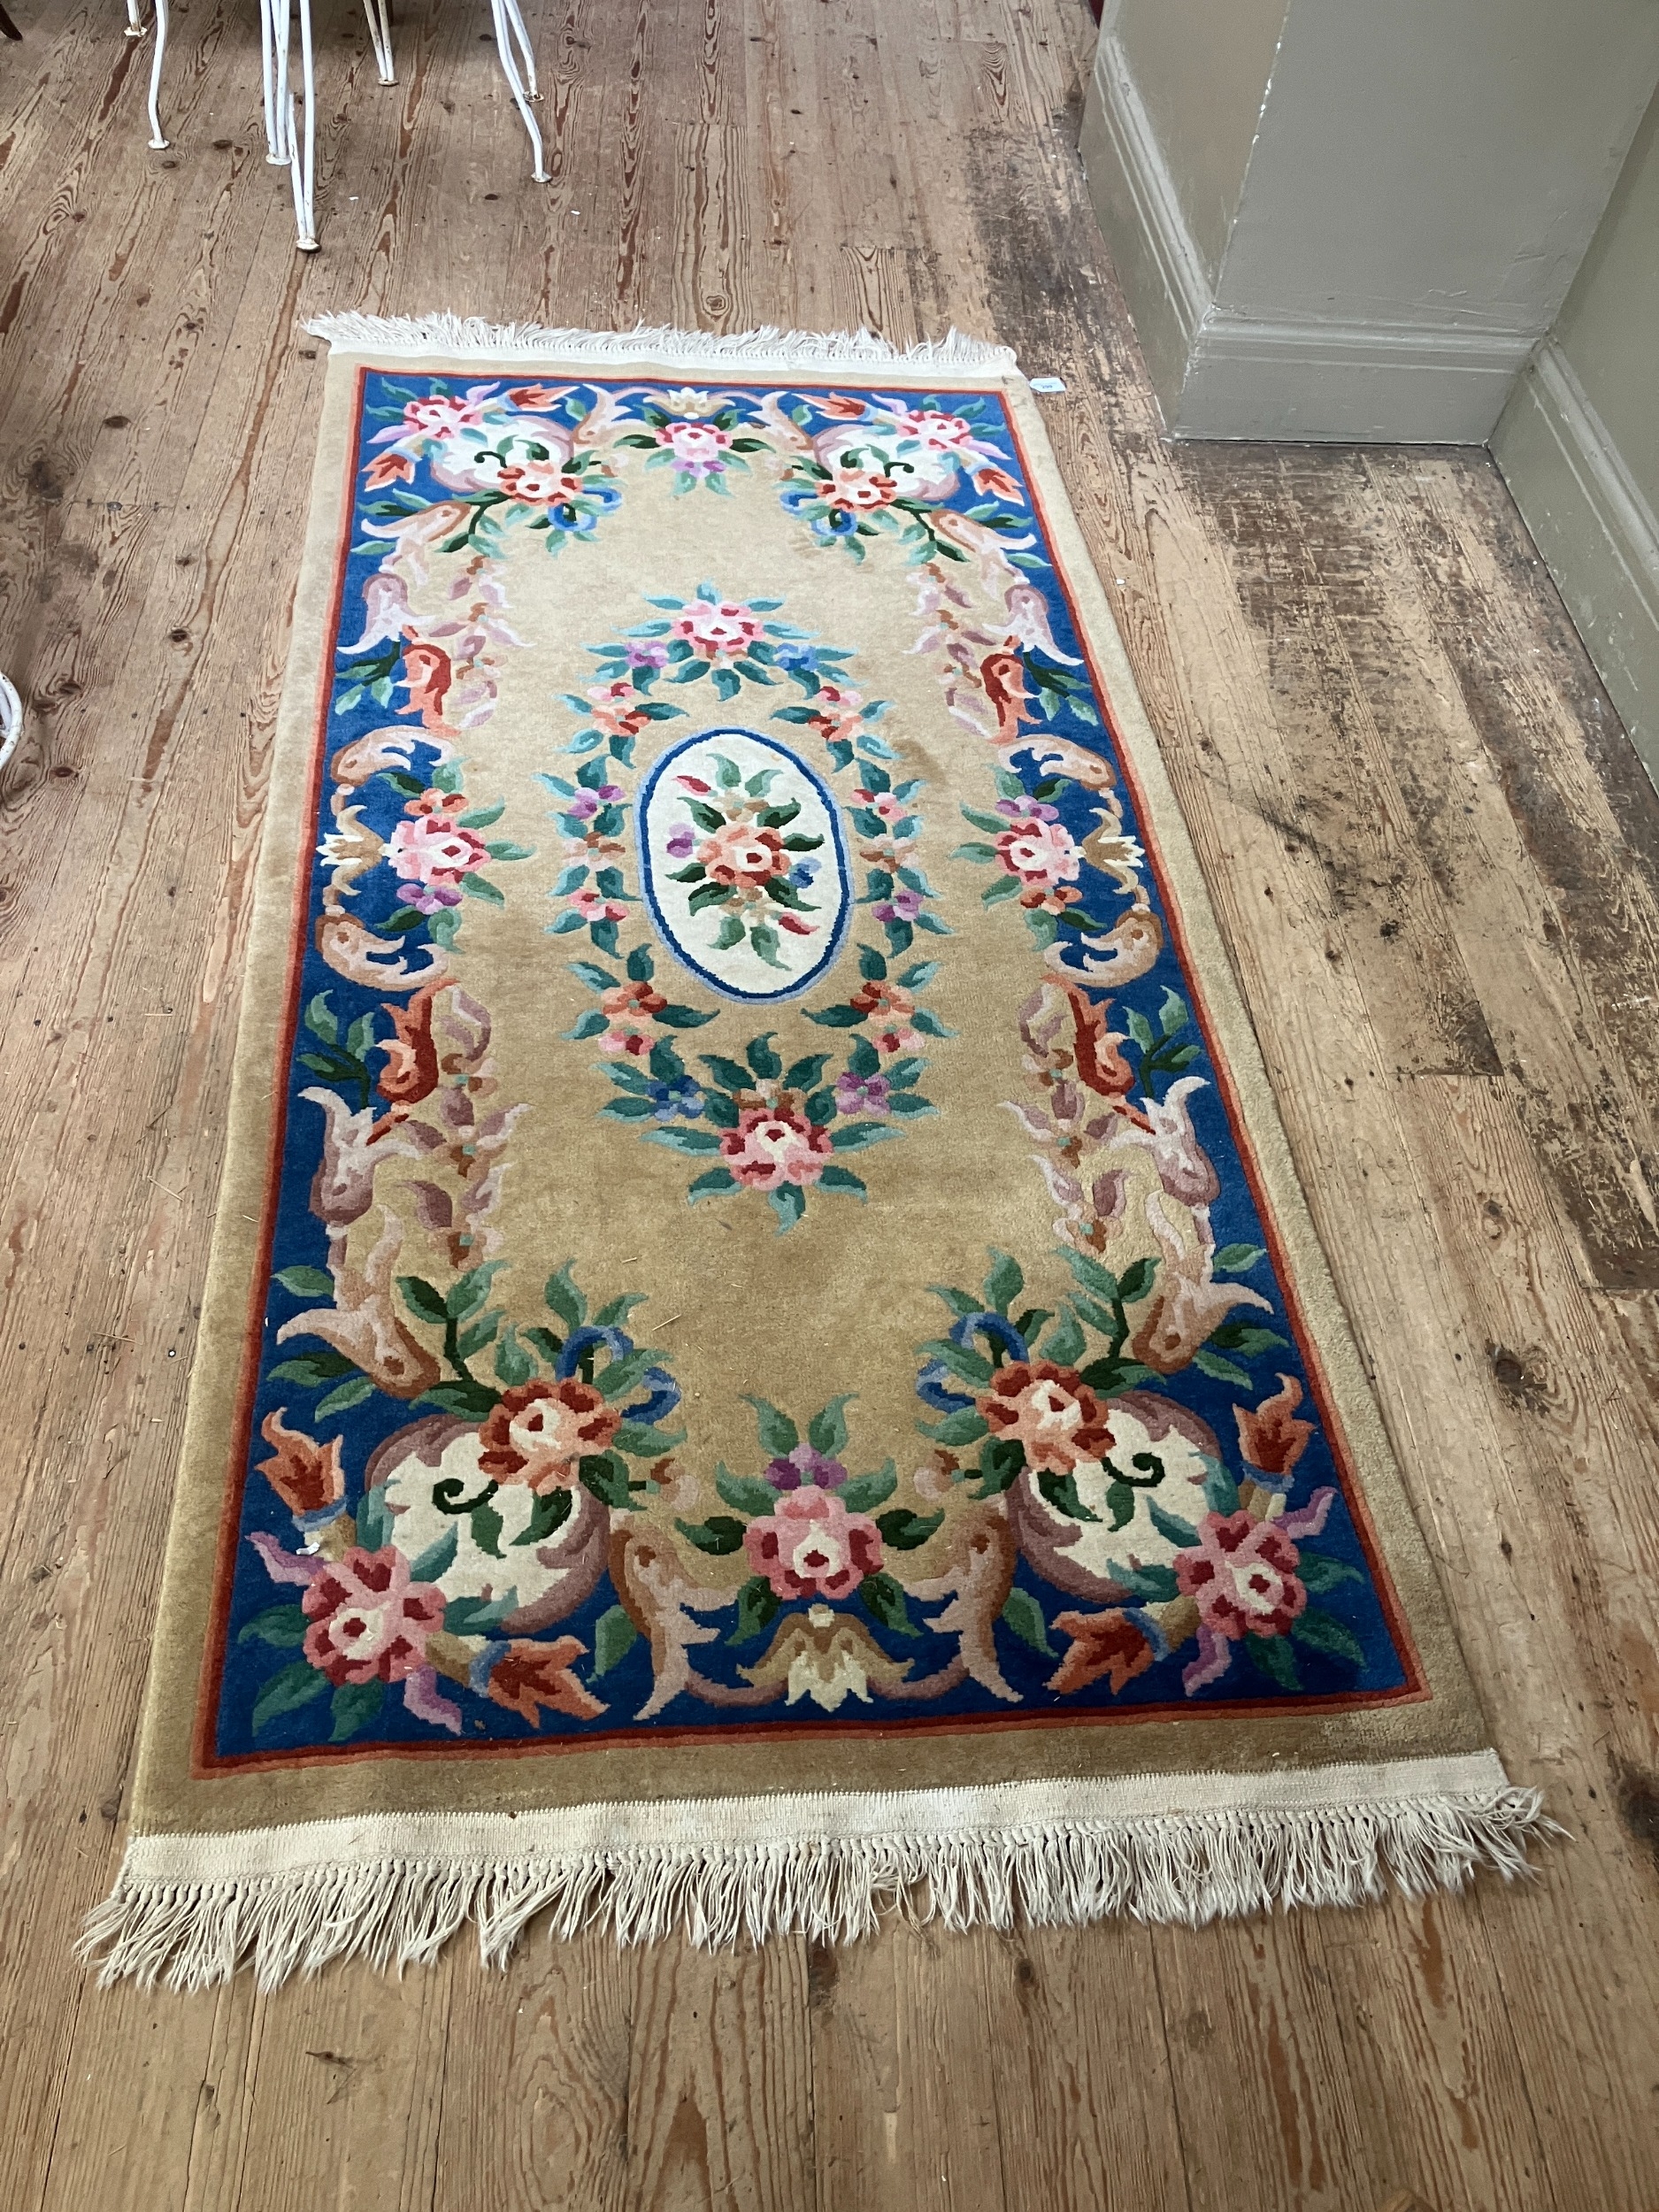 A Chinese wool rug of blue, rose, green, ivory and camel in a floral design